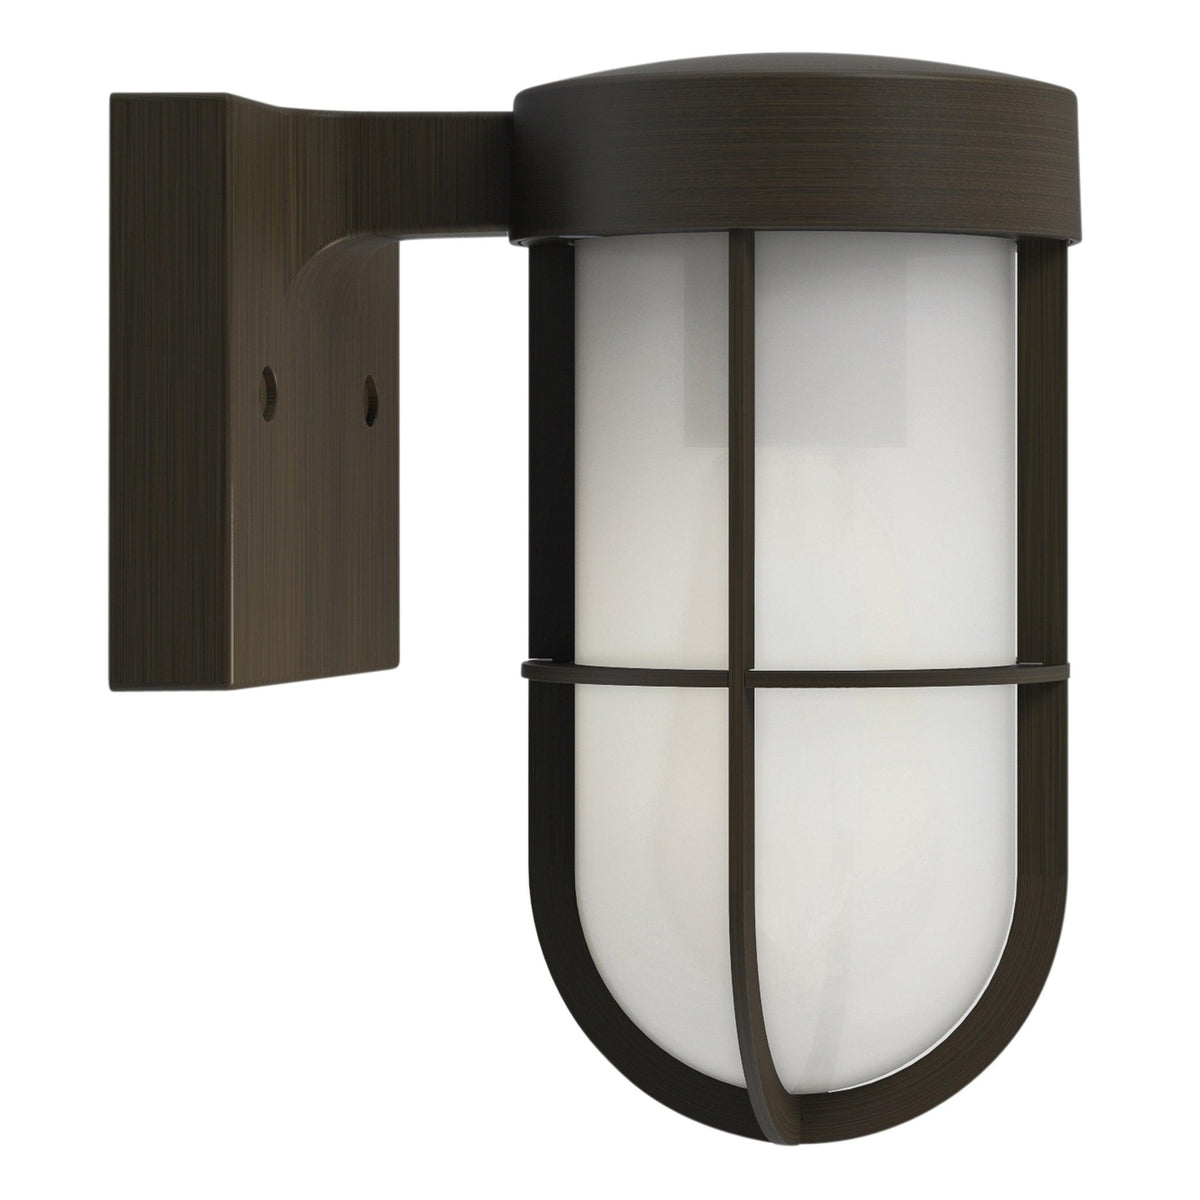 Astro Lighting - Cabin Frosted Wall Light - 1368016 | Montreal Lighting & Hardware